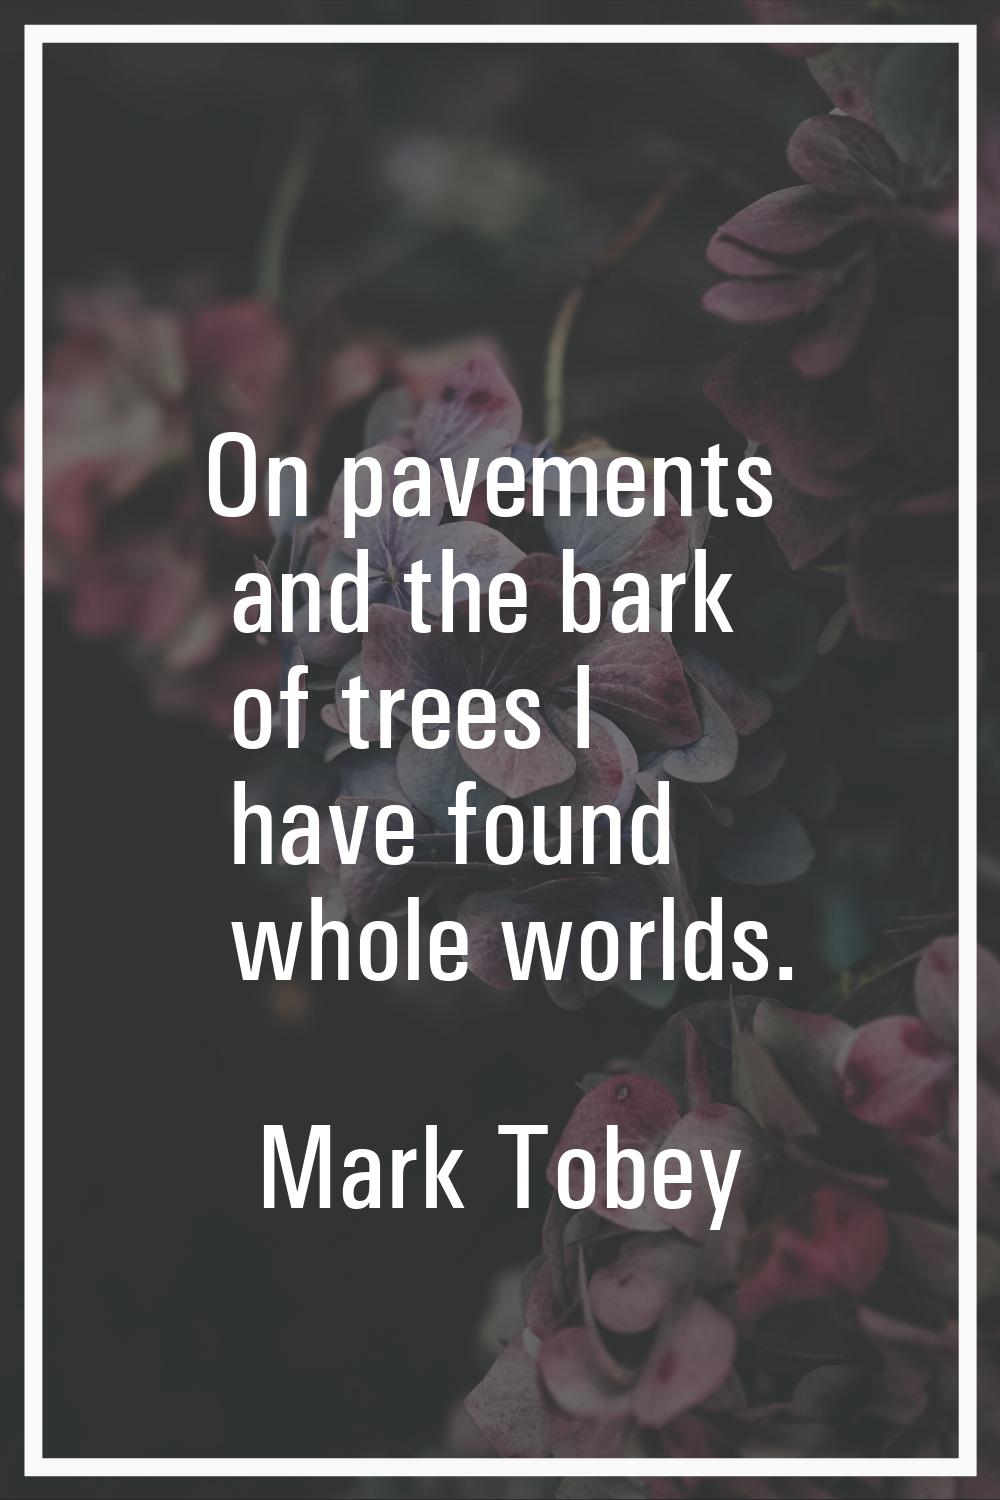 On pavements and the bark of trees I have found whole worlds.